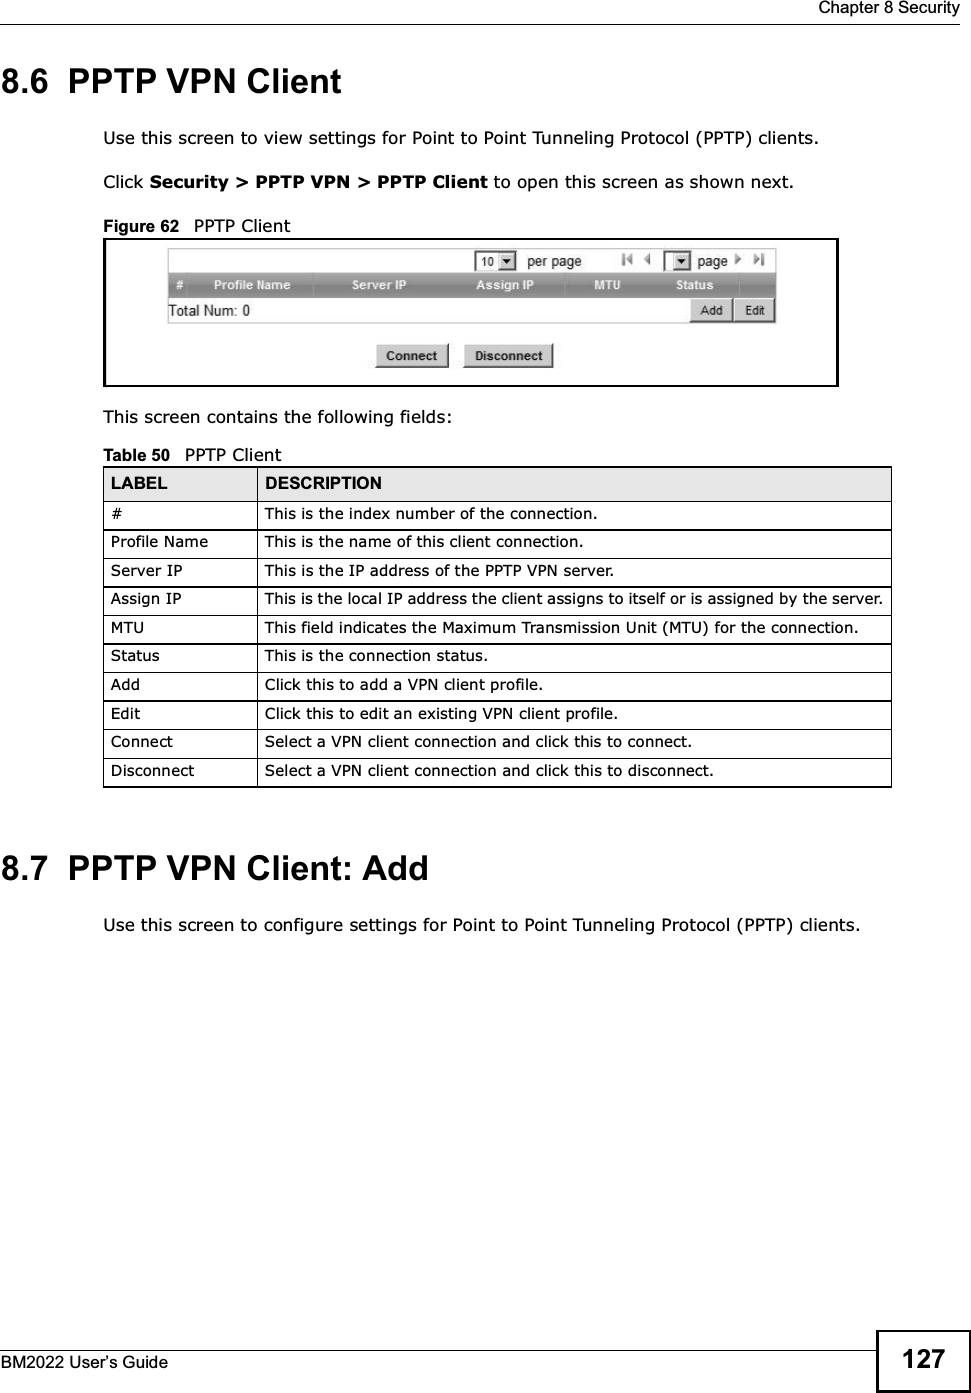  Chapter 8 SecurityBM2022 Users Guide 1278.6  PPTP VPN ClientUse this screen to view settings for Point to Point Tunneling Protocol (PPTP) clients.Click Security &gt; PPTP VPN &gt; PPTP Client to open this screen as shown next.Figure 62   PPTP ClientThis screen contains the following fields:8.7  PPTP VPN Client: AddUse this screen to configure settings for Point to Point Tunneling Protocol (PPTP) clients.Table 50   PPTP ClientLABEL DESCRIPTION# This is the index number of the connection.Profile Name This is the name of this client connection.Server IP This is the IP address of the PPTP VPN server.Assign IP This is the local IP address the client assigns to itself or is assigned by the server.MTU This field indicates the Maximum Transmission Unit (MTU) for the connection.Status This is the connection status.Add Click this to add a VPN client profile.Edit Click this to edit an existing VPN client profile.Connect Select a VPN client connection and click this to connect.Disconnect Select a VPN client connection and click this to disconnect.